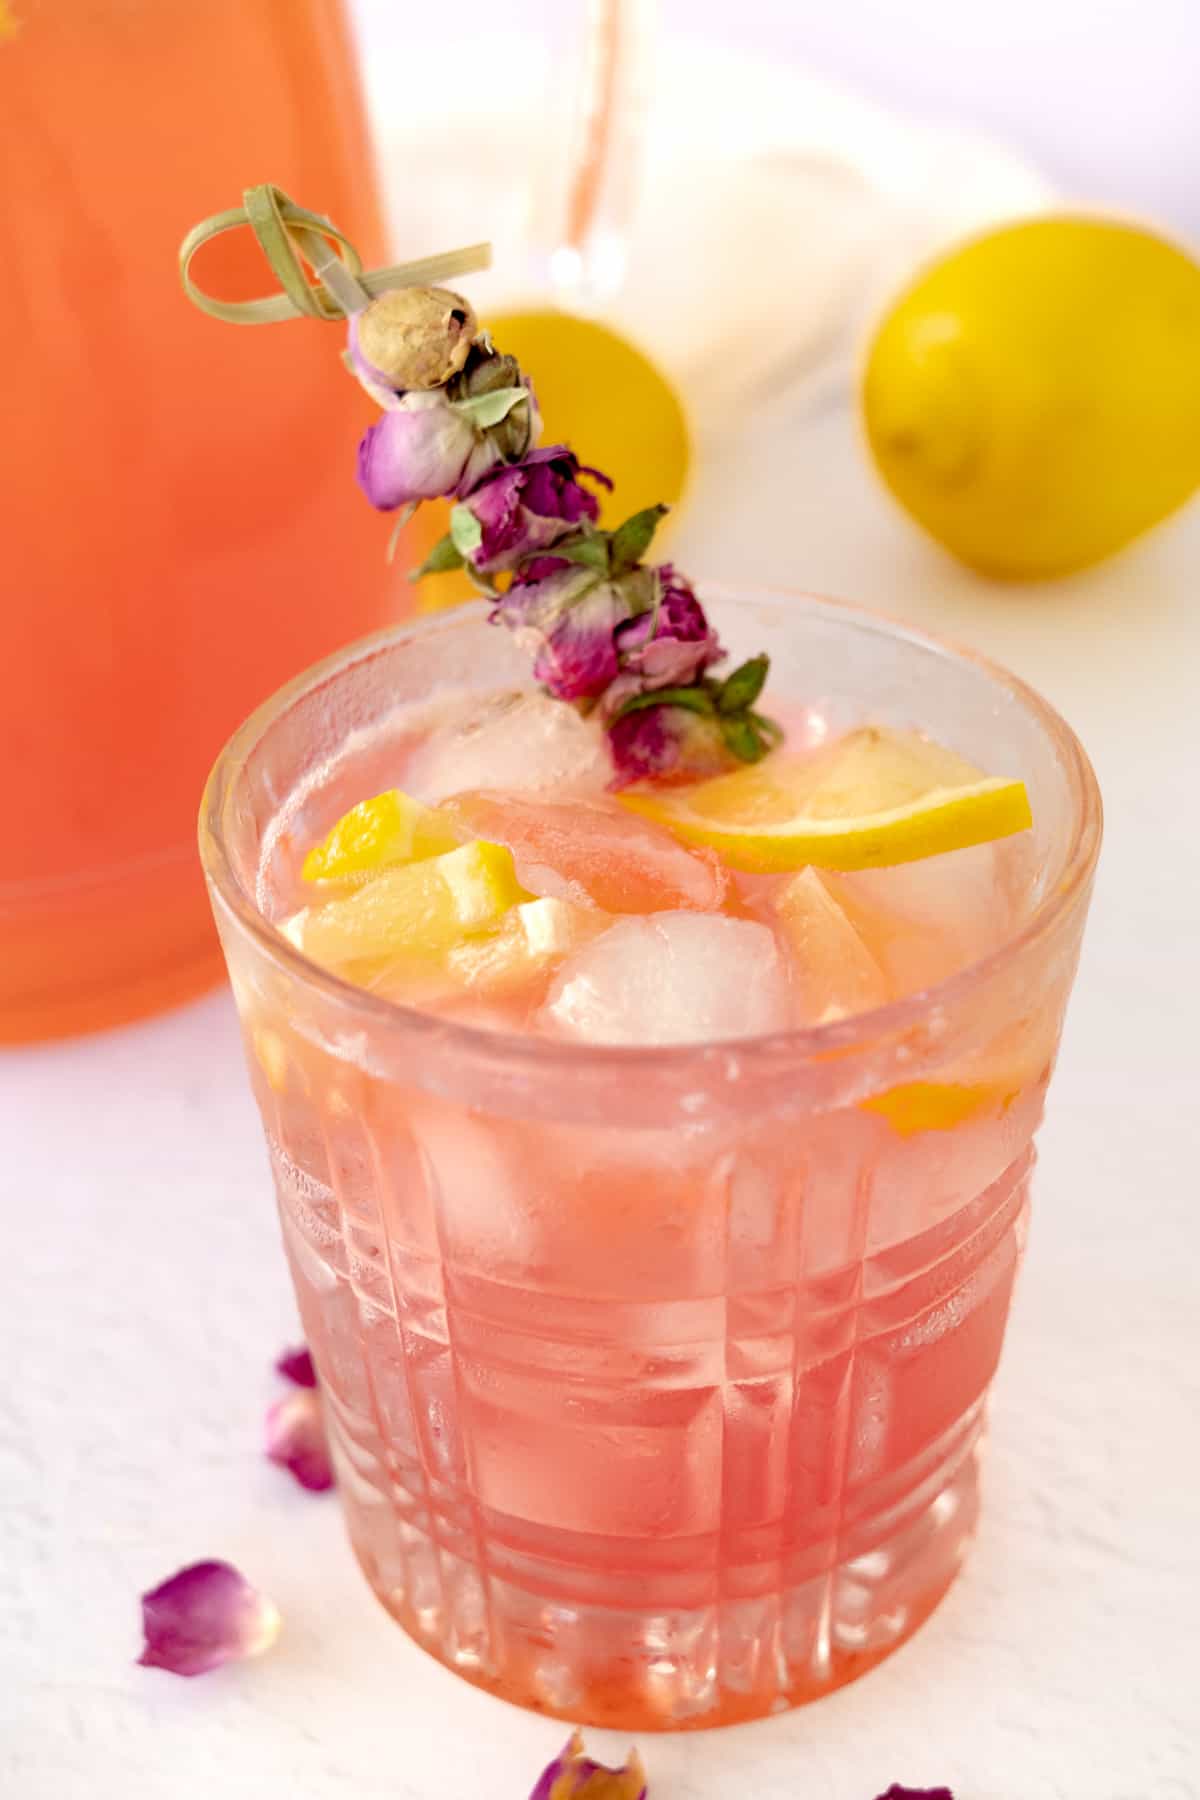 a glass of pink lemonade garnished with roses